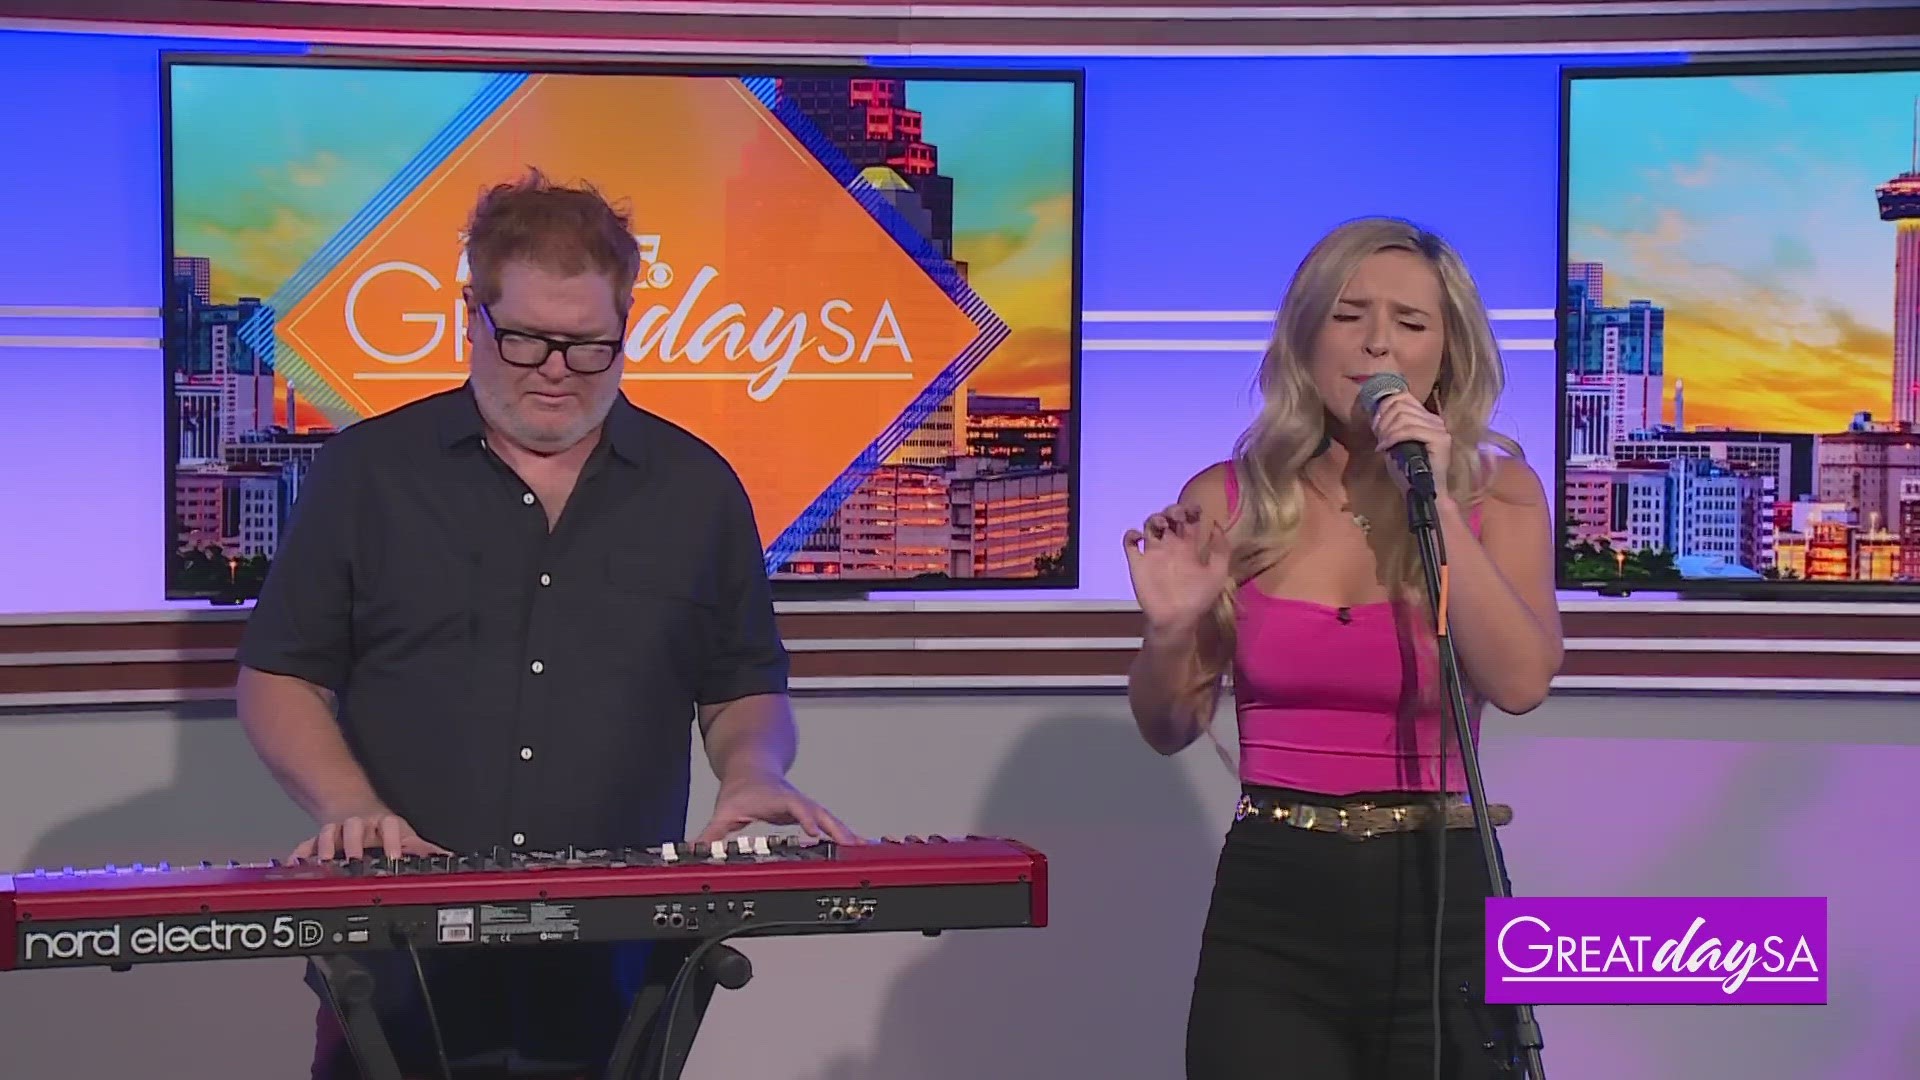 Country blues & soul singer Alexia performs an original song with musician Mike Atkins.